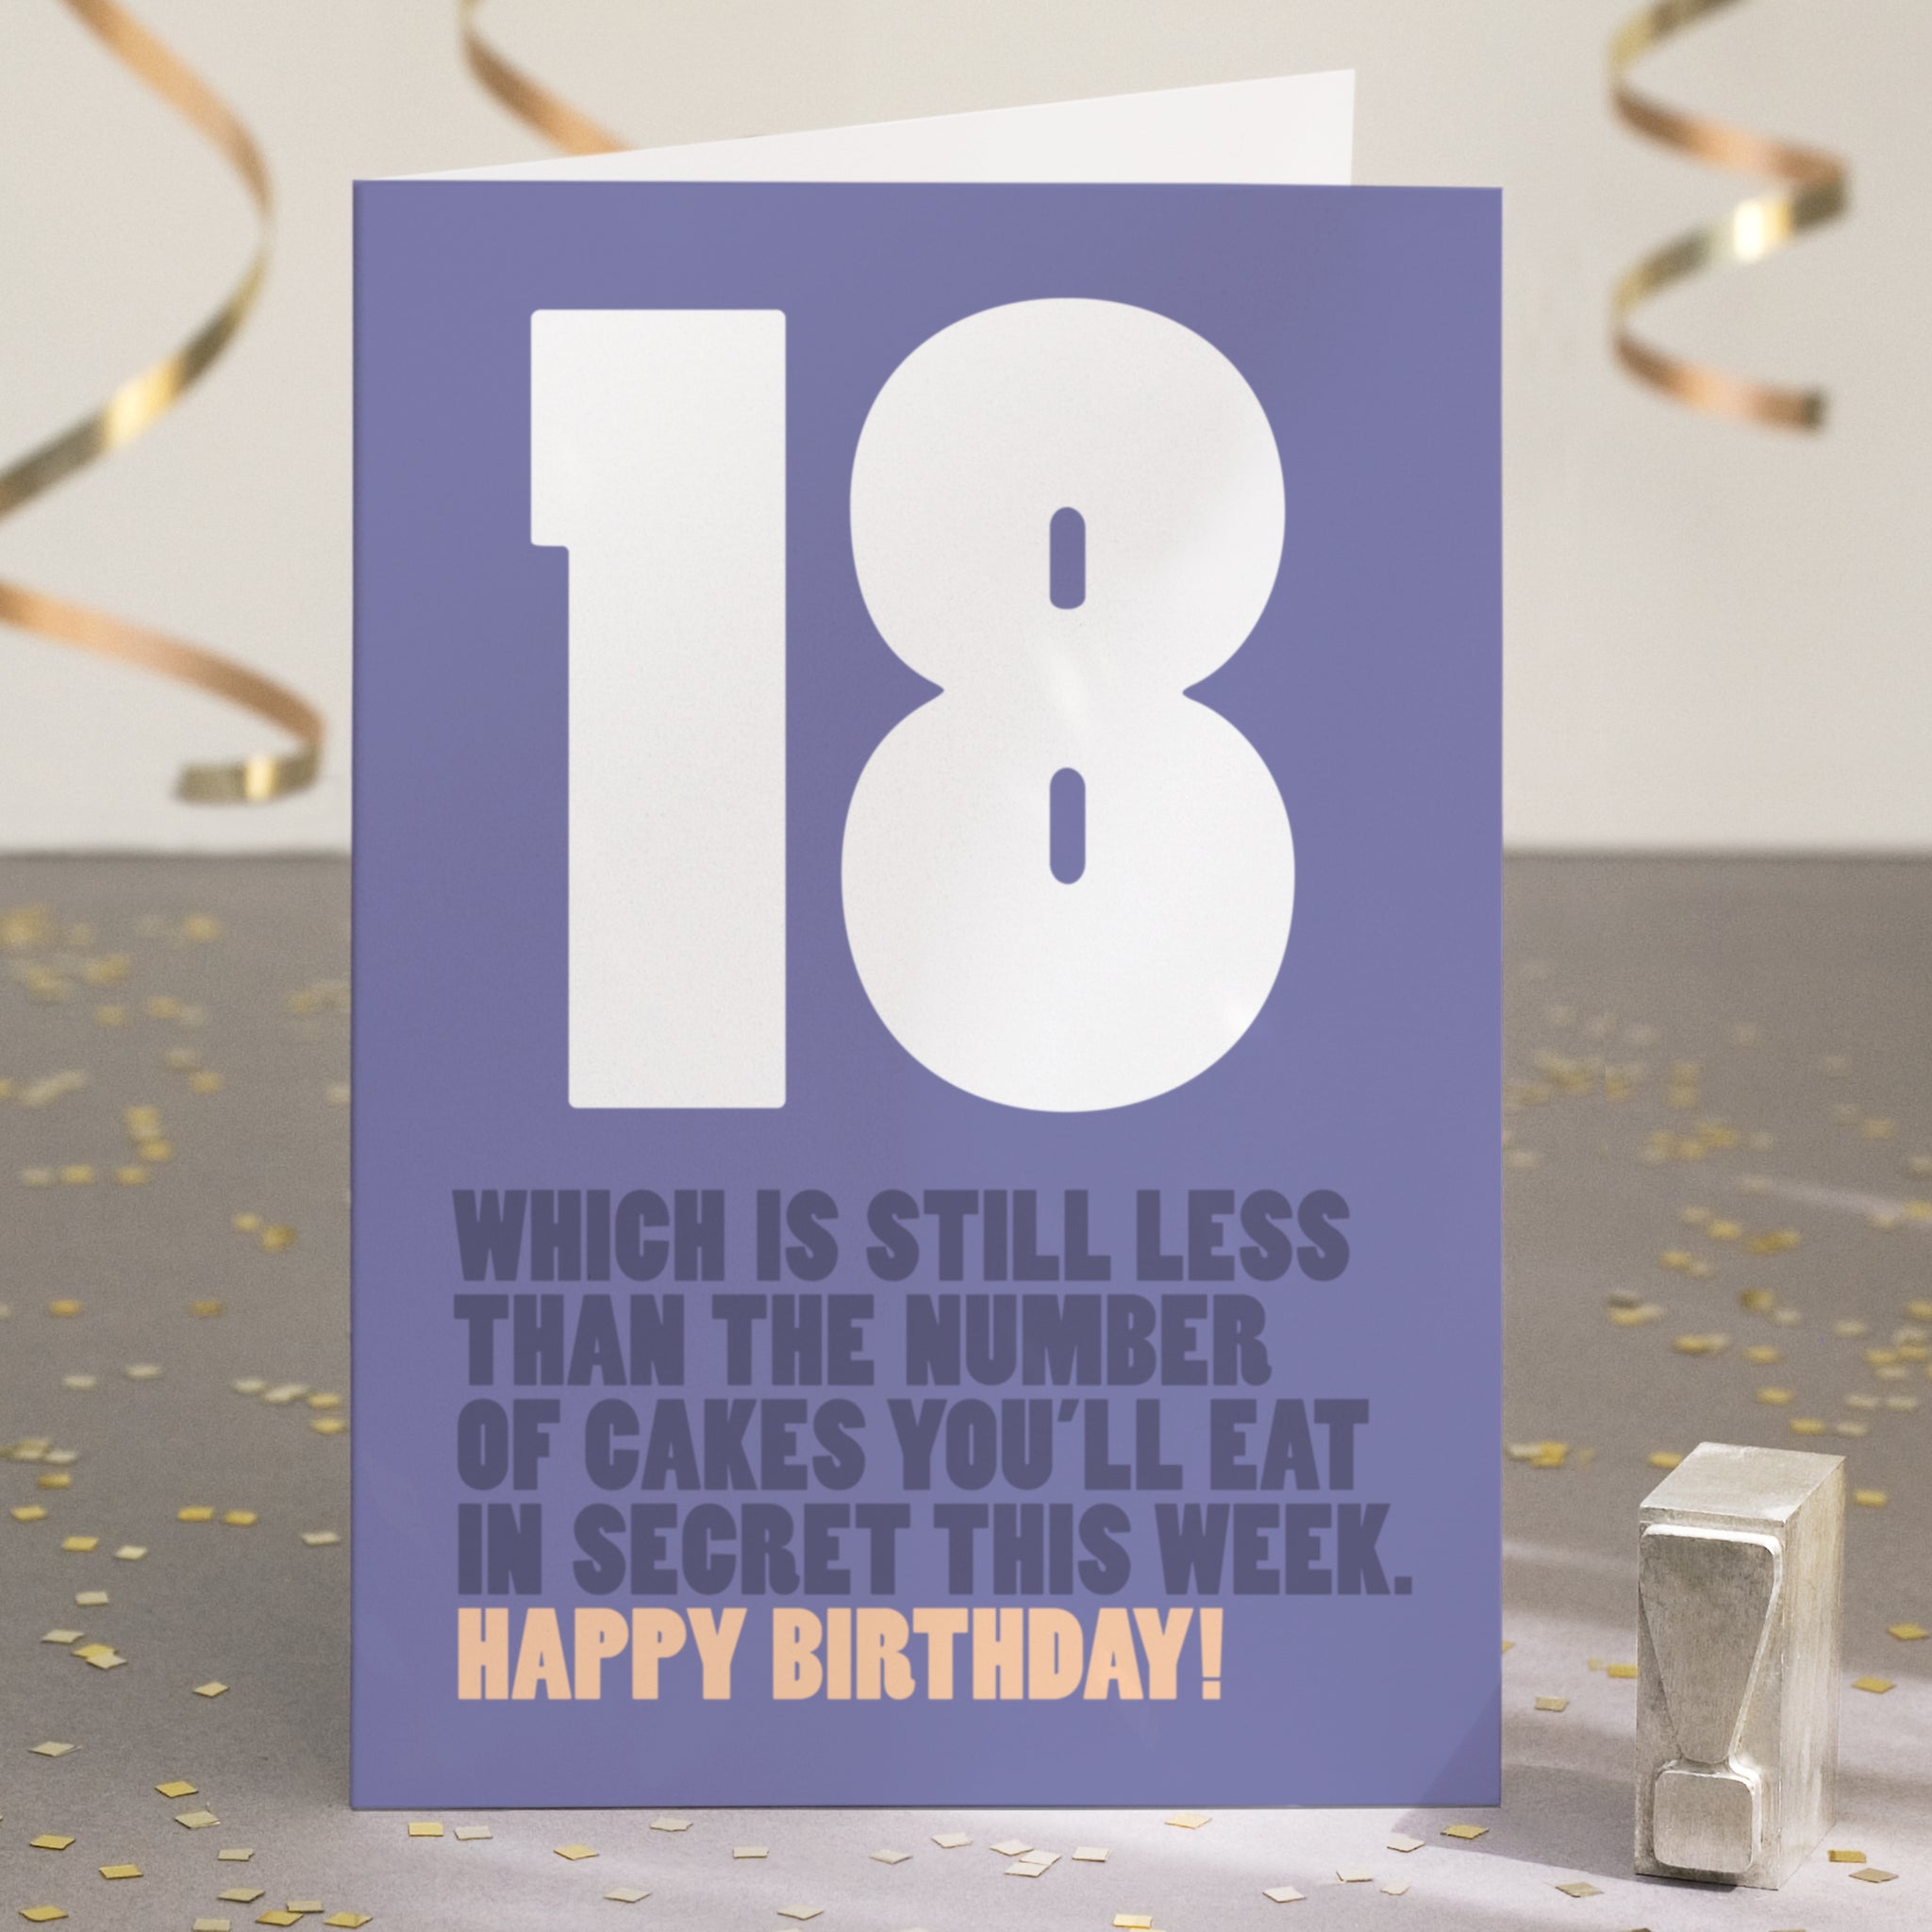 A funny 18th birthday card with the text '18, which is still less than the number of cakes you’ll eat in secret this week'.